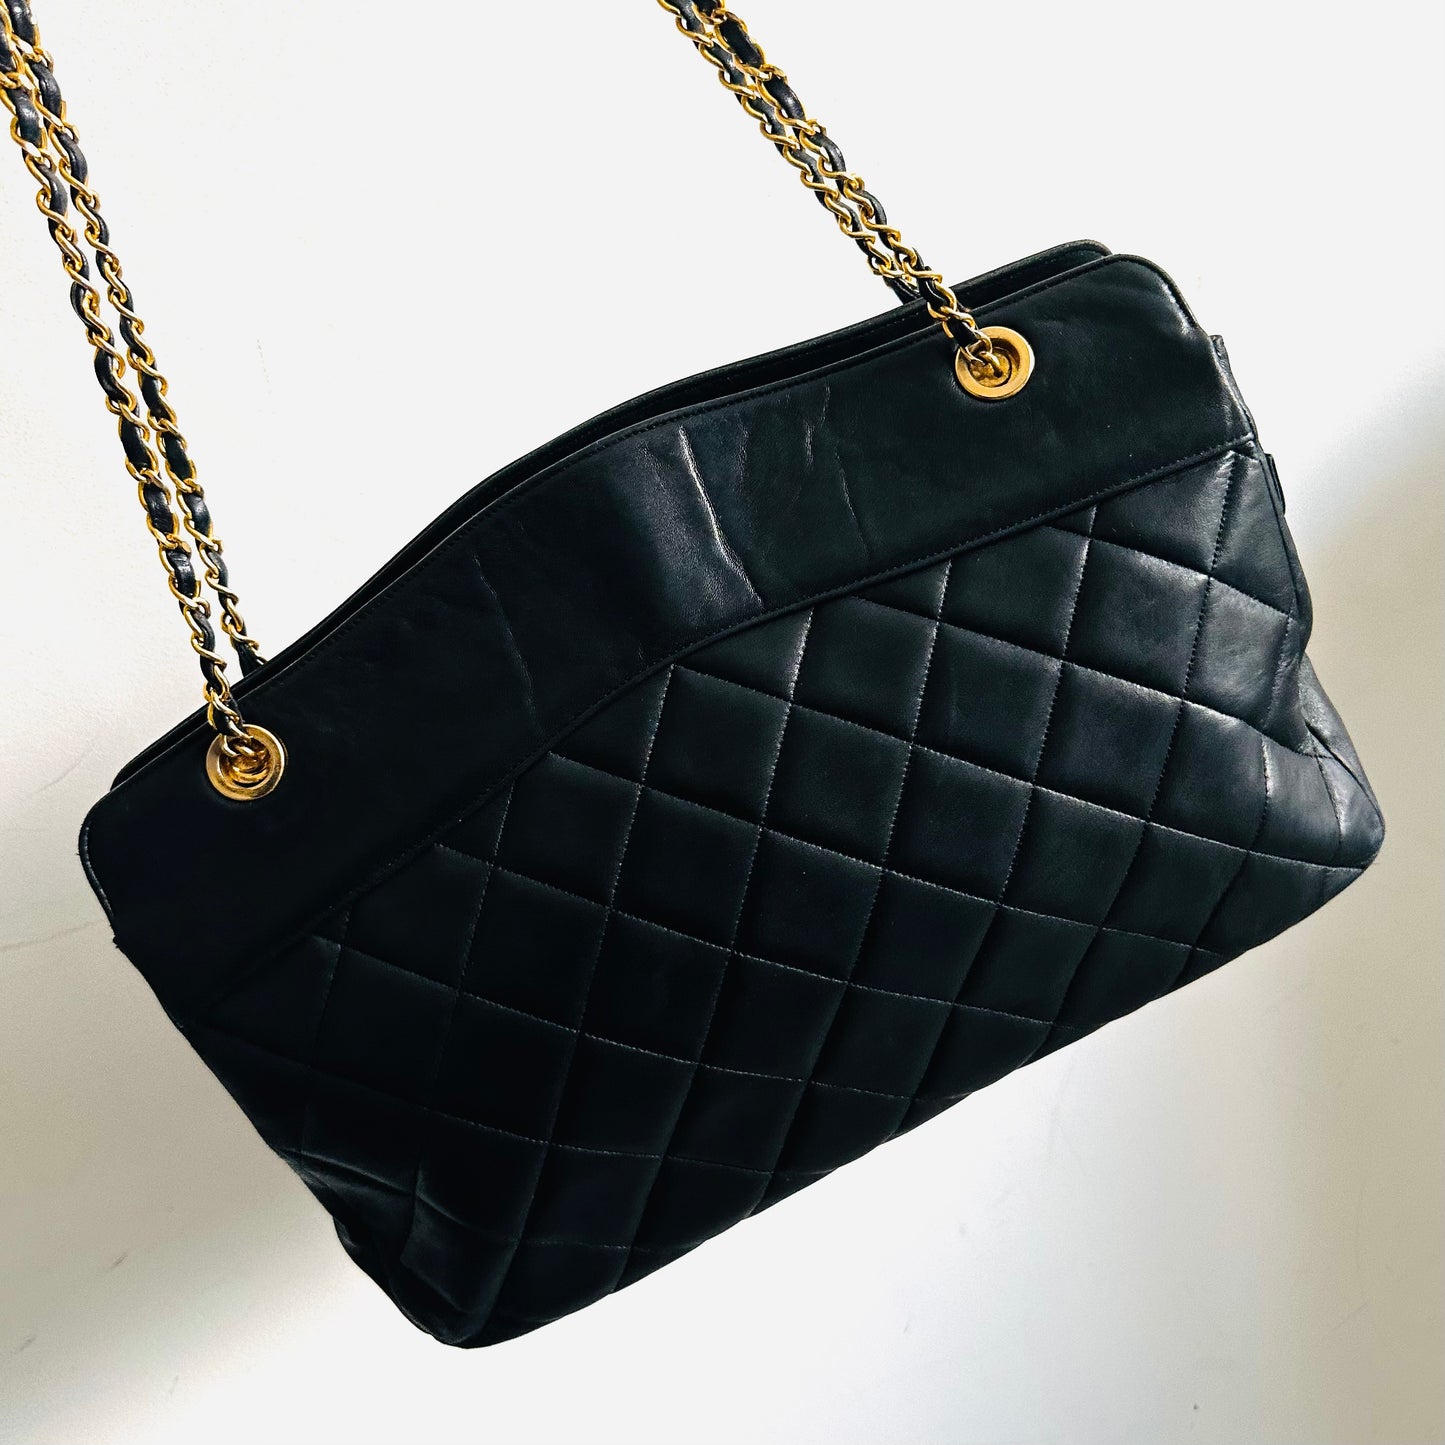 Chanel CC Black GHW Quilted Lambskin Chain Shoulder Sling Tote Bag 1s